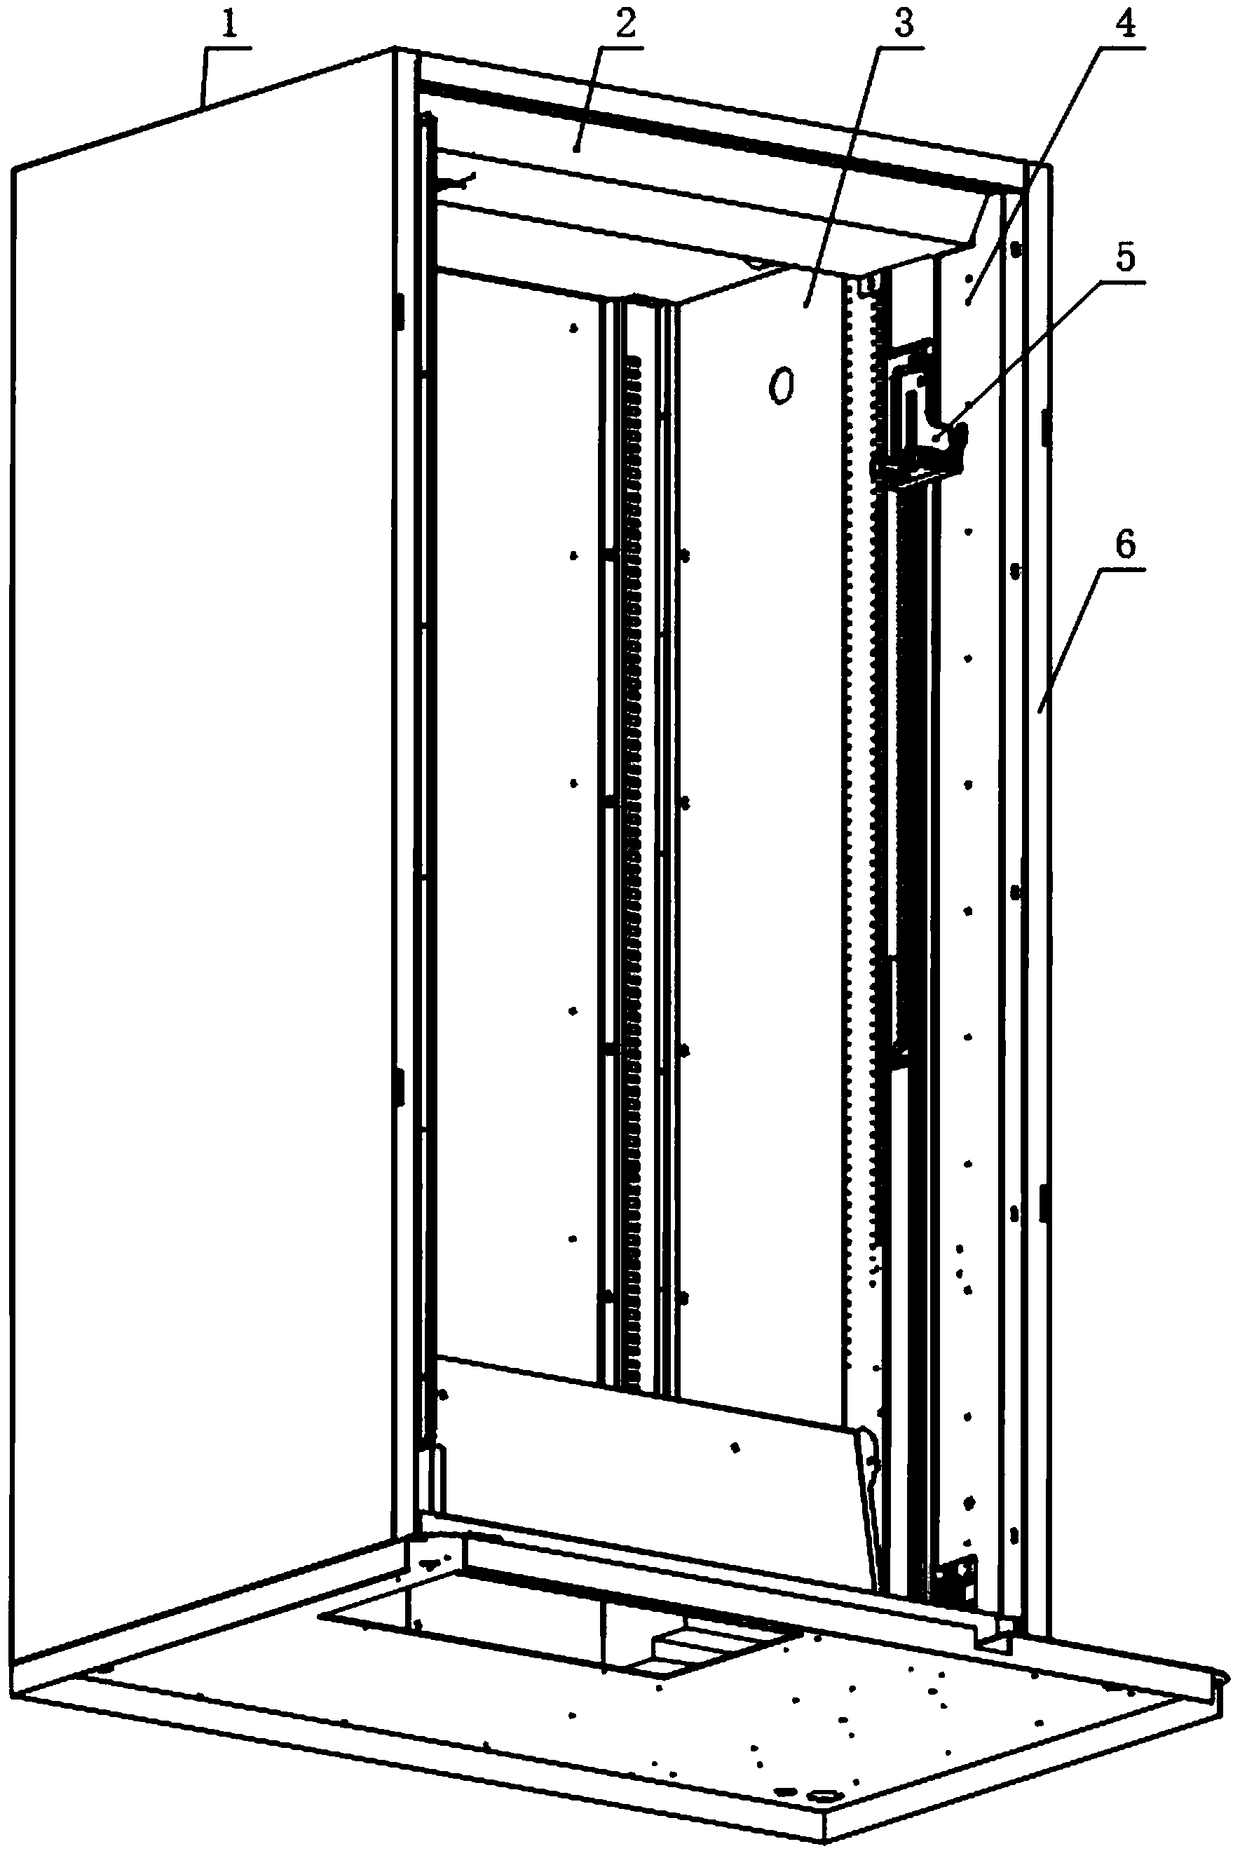 Vending machine lift and anti-theft pickup structure